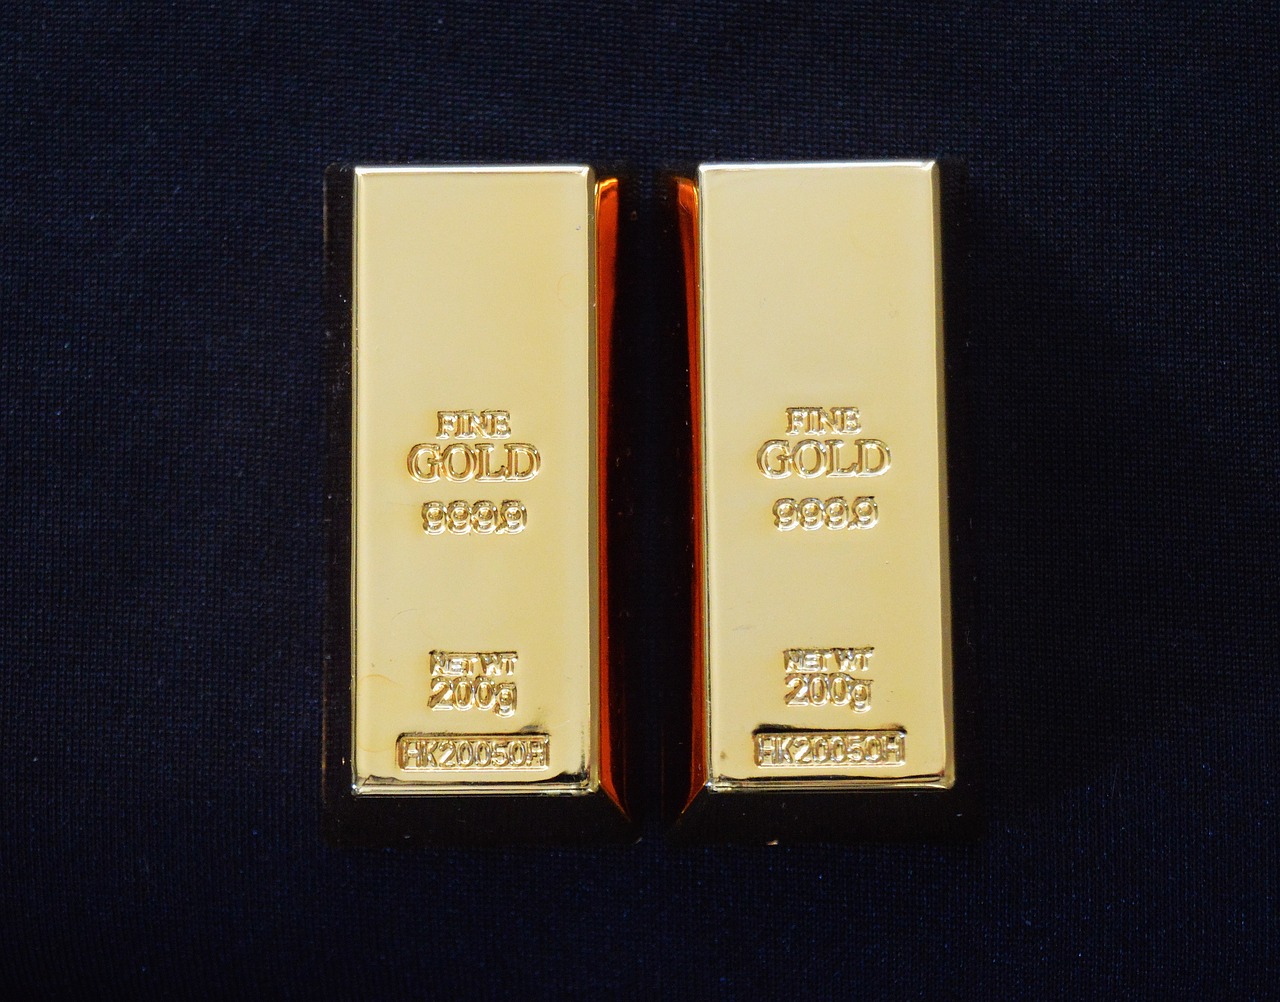 Friday Feature: The Definitive Guide to Buying Gold Bars (Image by Ulrich Dregler from Pixabay)